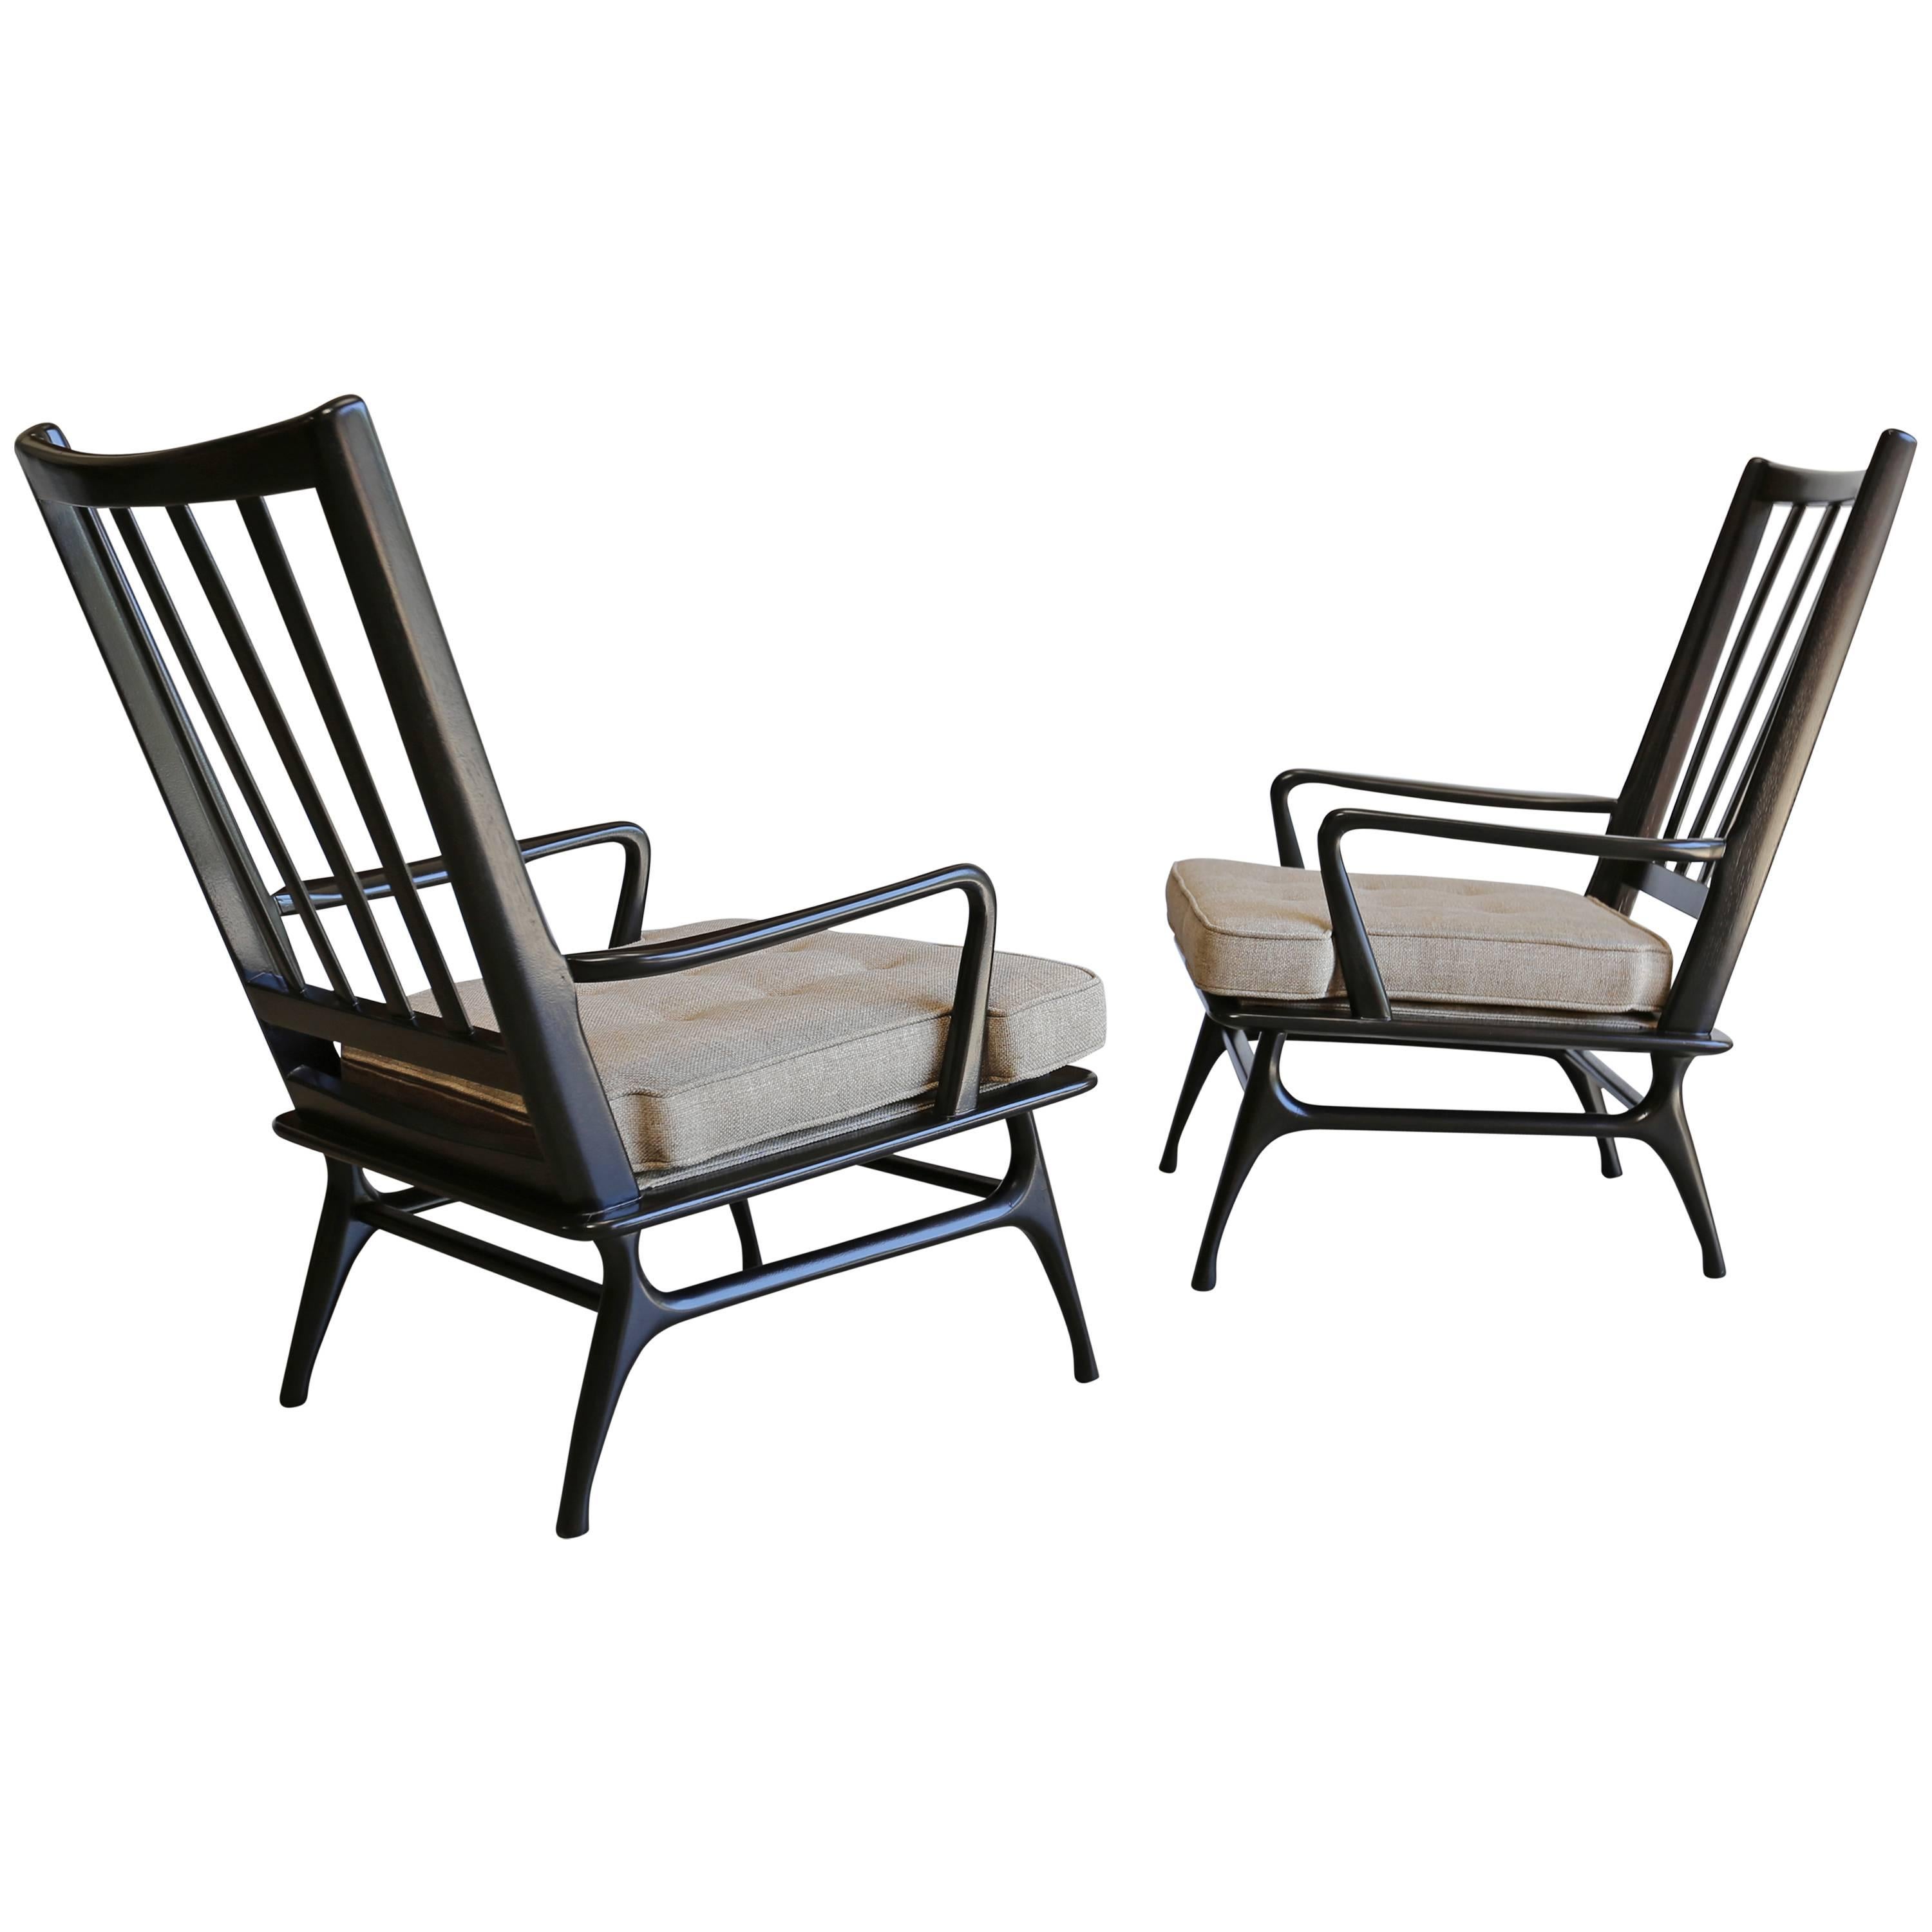 Pair of Sculptural High Back Lounge Chairs